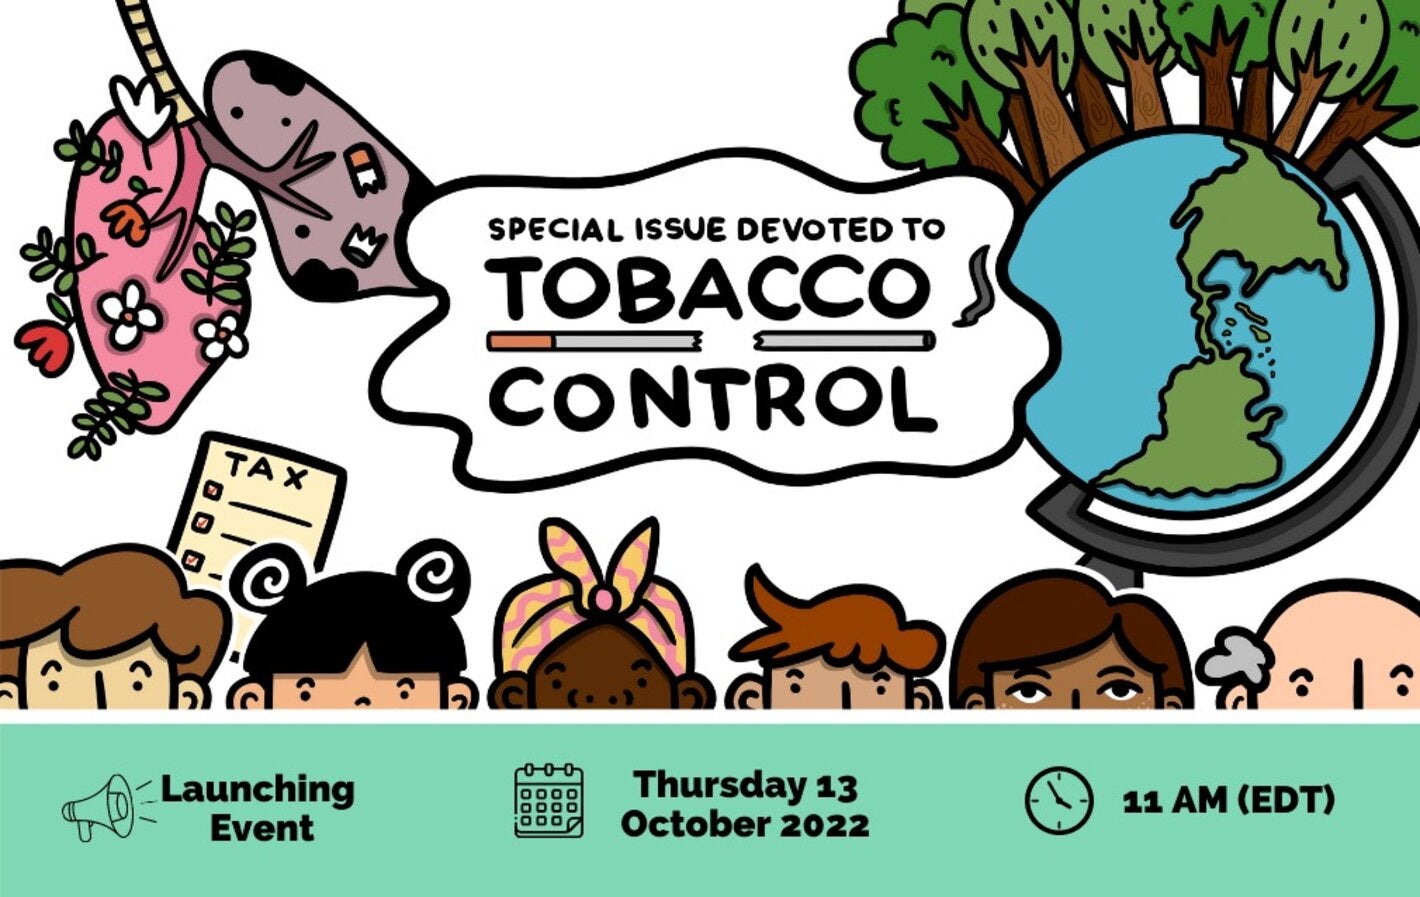 Launch of the Special Issue devoted to Tobacco Control